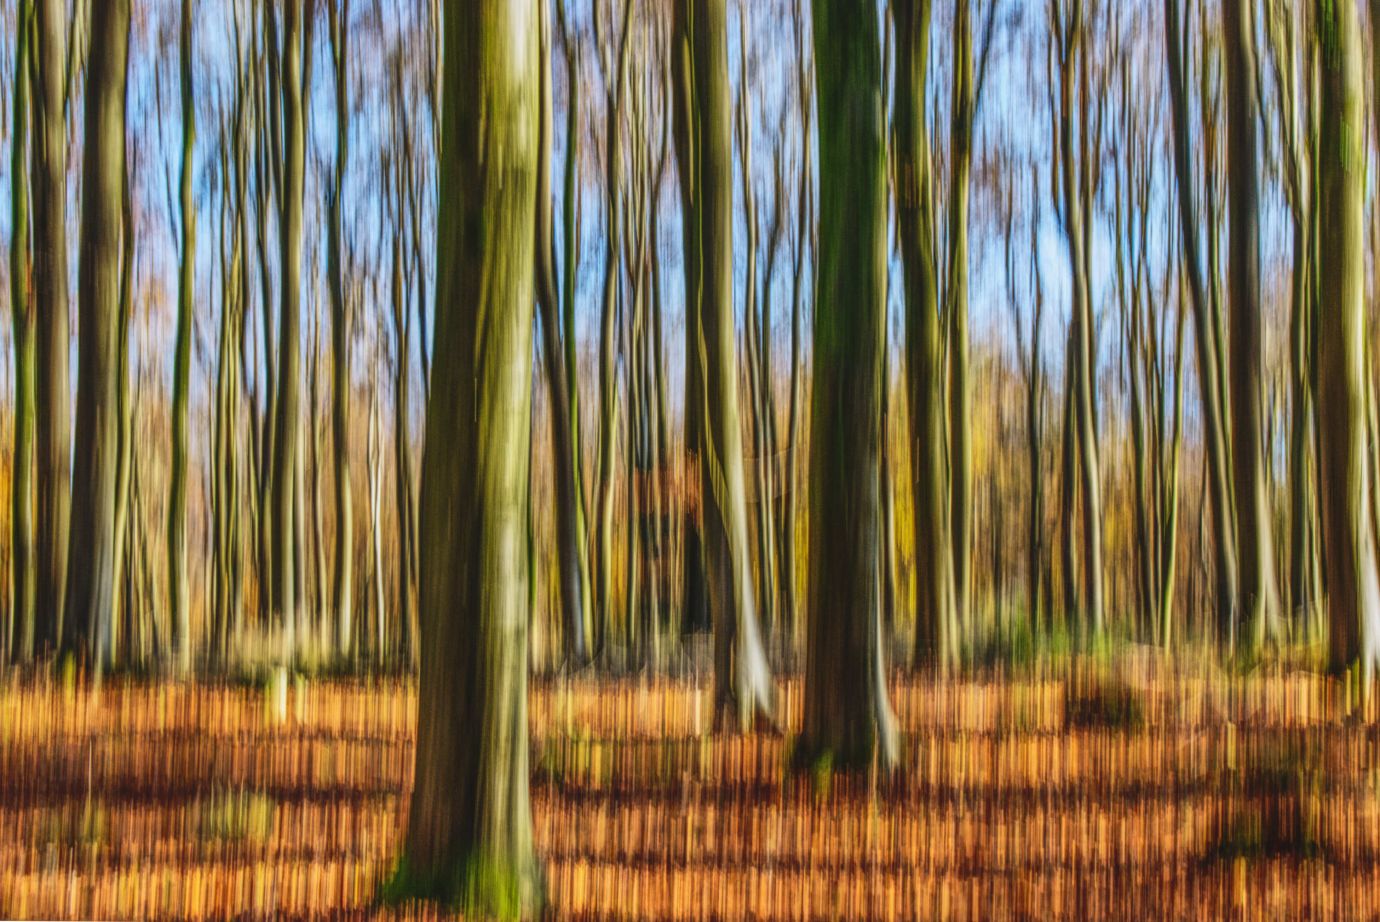 Beech-trees-autumn-ICM-Smannell-Woods-Hampshire-22112021